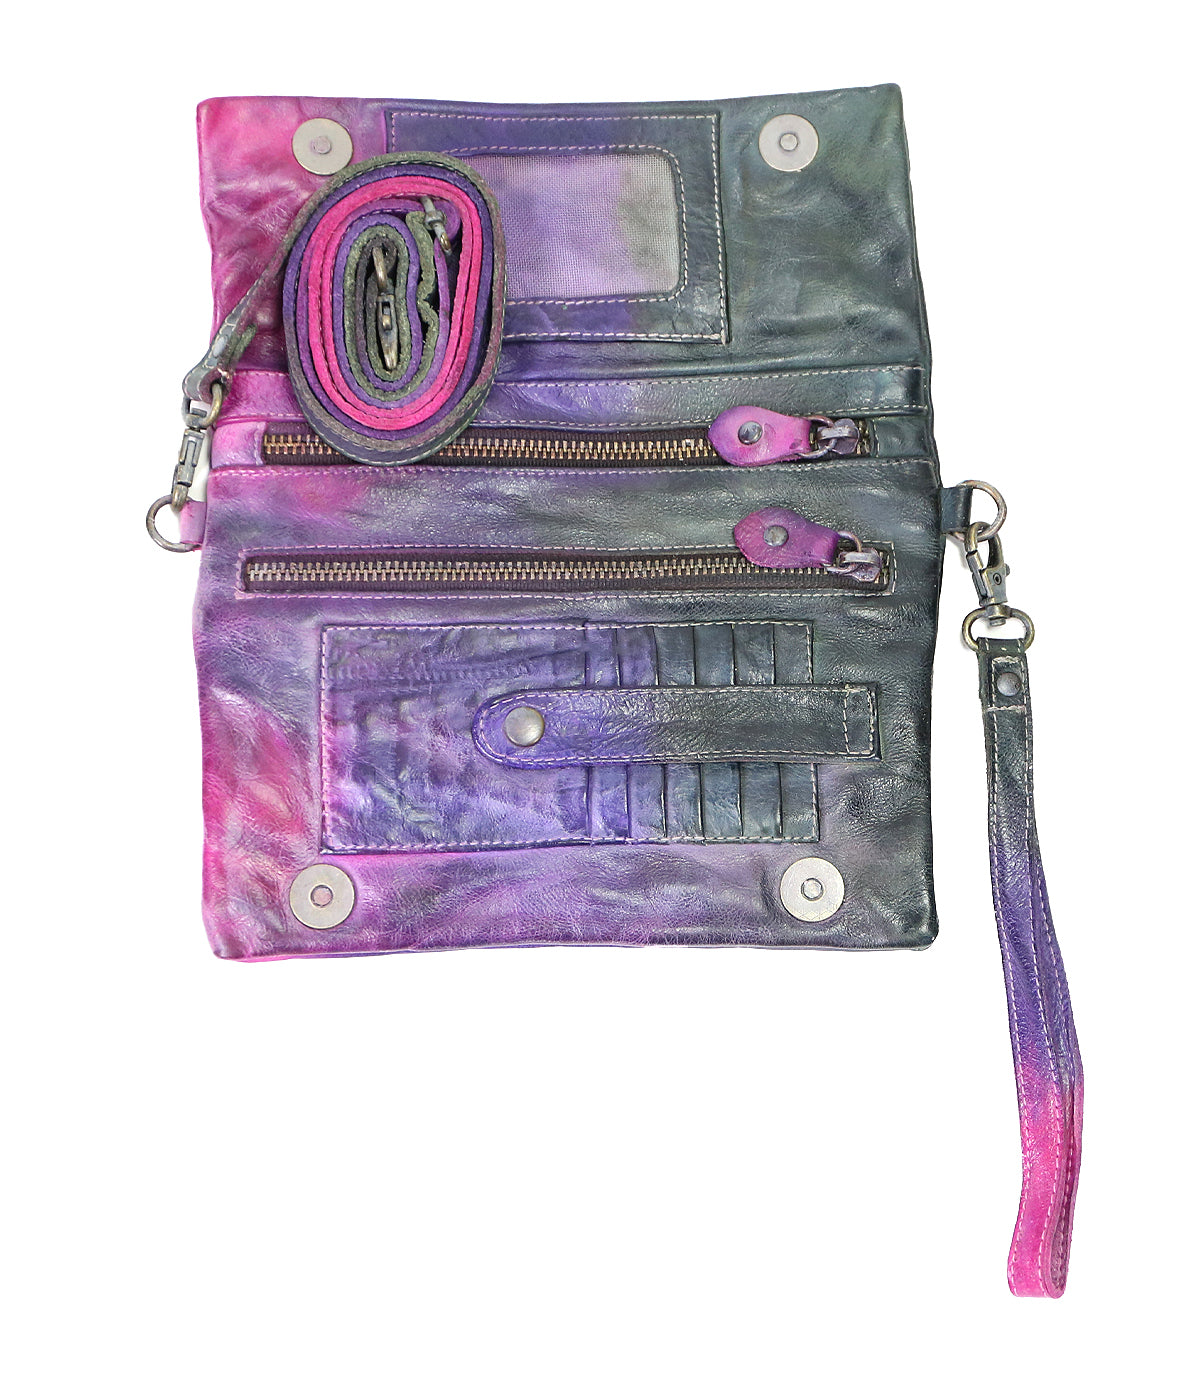 Cadence multicolored leather 3-in-1 wallet with various compartments and a wrist strap, featuring zippers and snap buttons by Bed Stu.